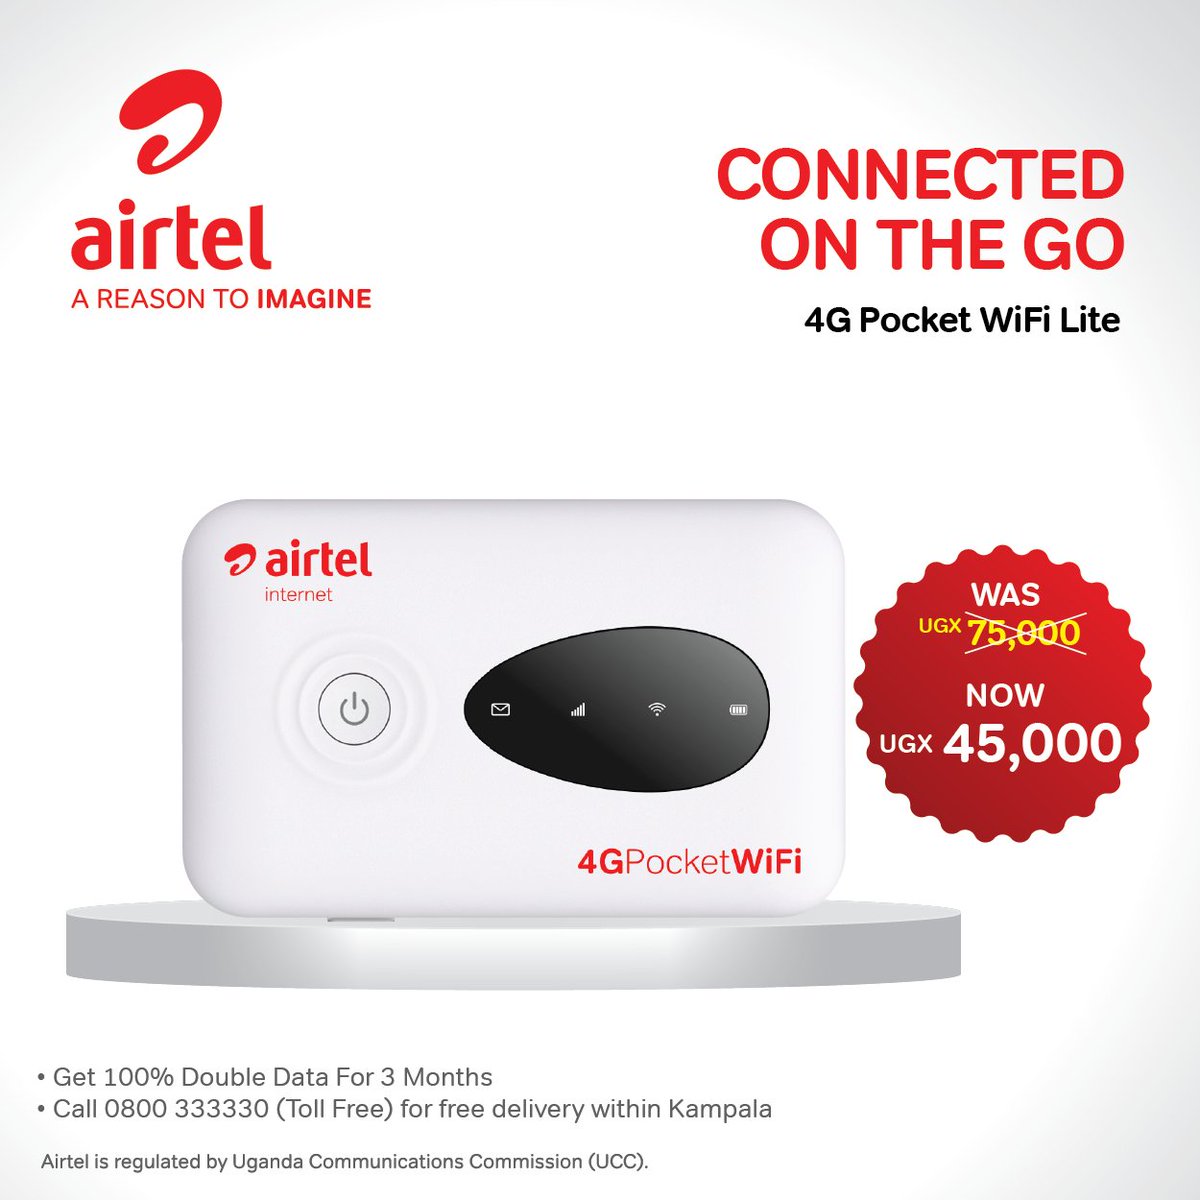 Stay connected wherever you go with #4GPocketWiFiLite, now available for just 45k. Visit any Airtel shop near you to get yours today!